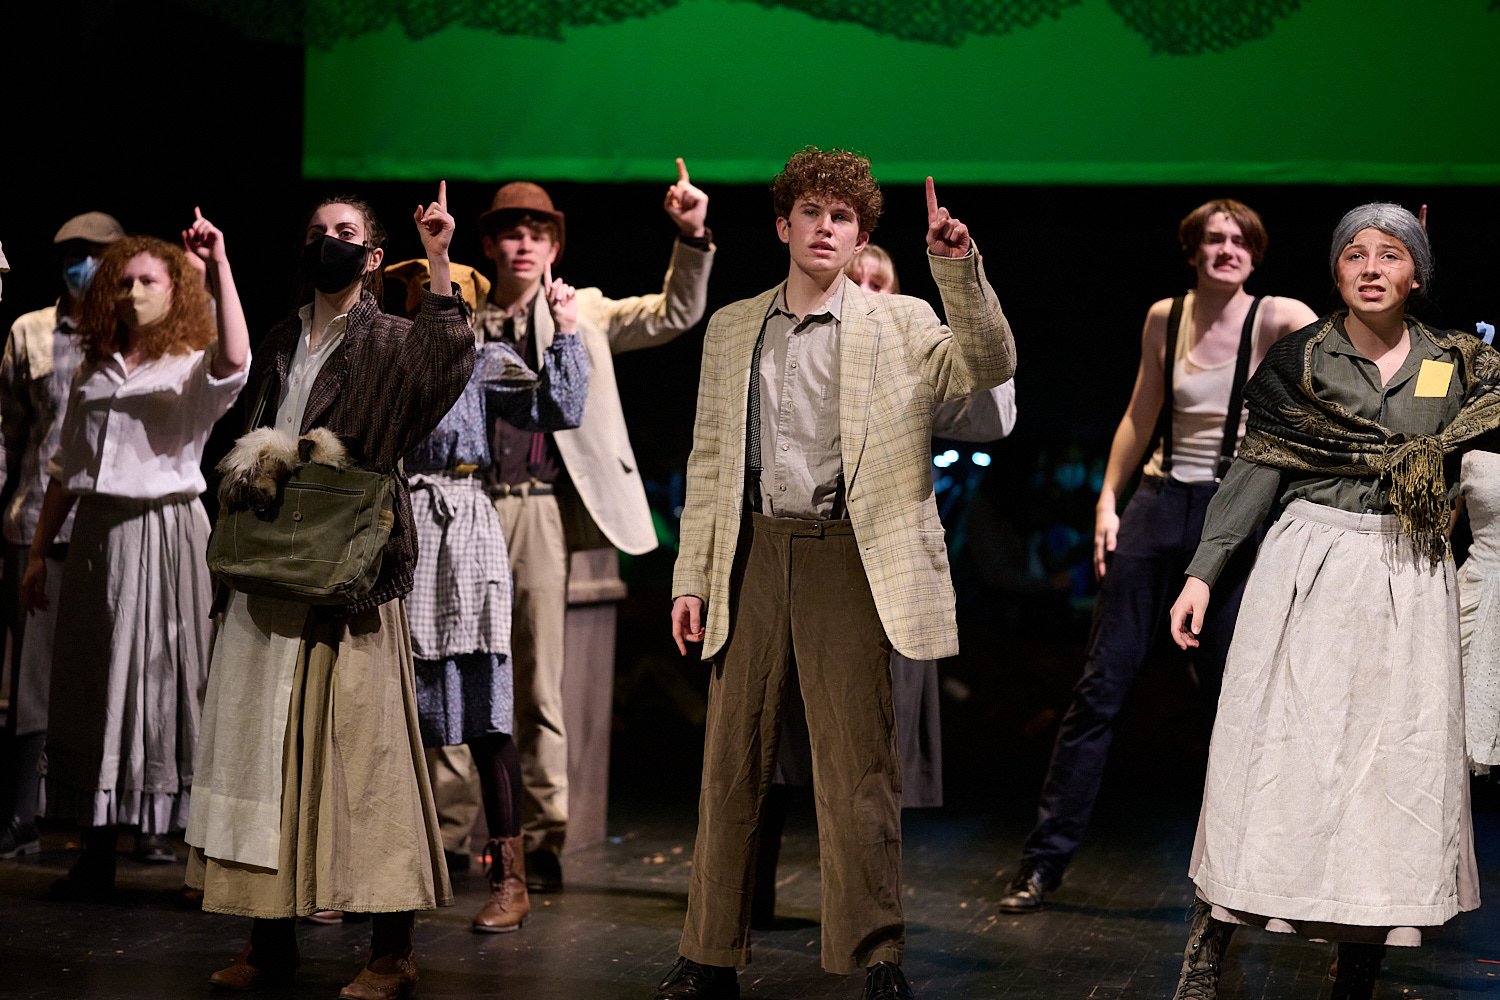  SEWICKLEY, PA, USA - MARCH 2ND 2022: High School students of Sewickley Academy are performing in an annual musical show “Urinetown” running on March 3rd-5th 2022. Ryan Scott 